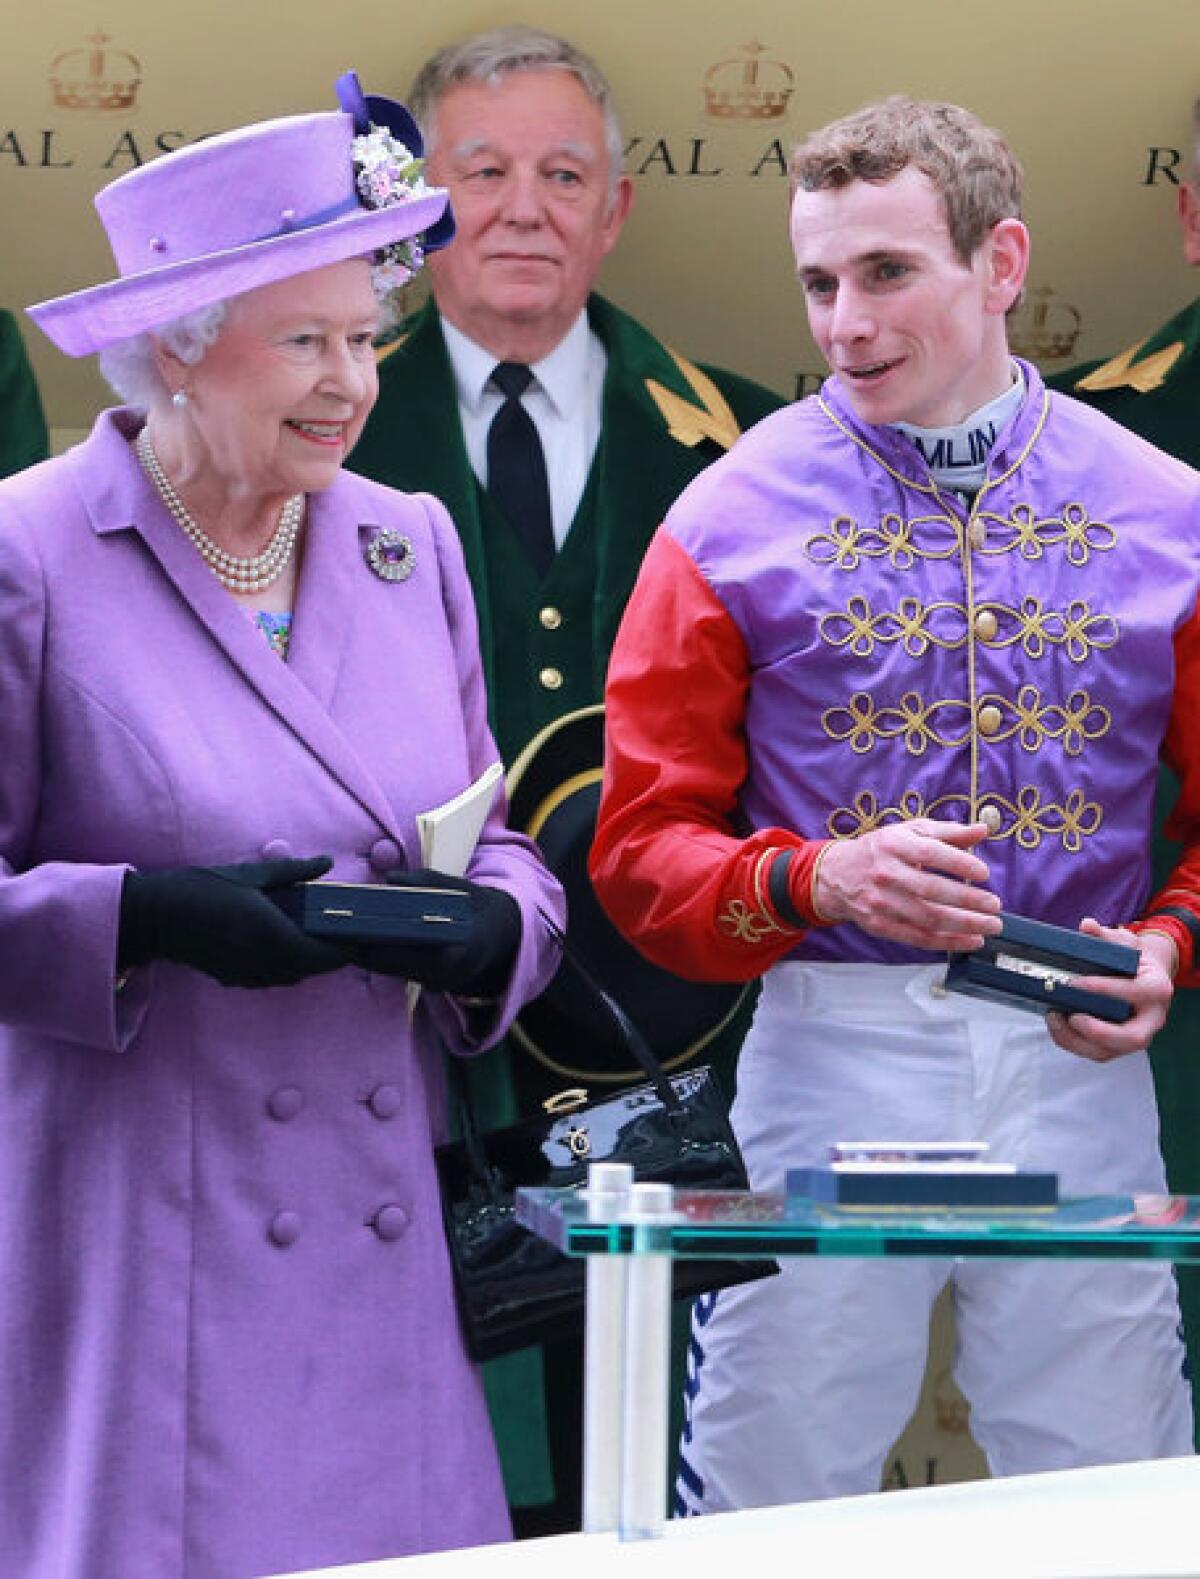 Queen Elizabeth II, dressed in purple, with jockey Ryan Moore as they celebrate winning the Gold Cup during Day 3 of the Royal Ascot in England.